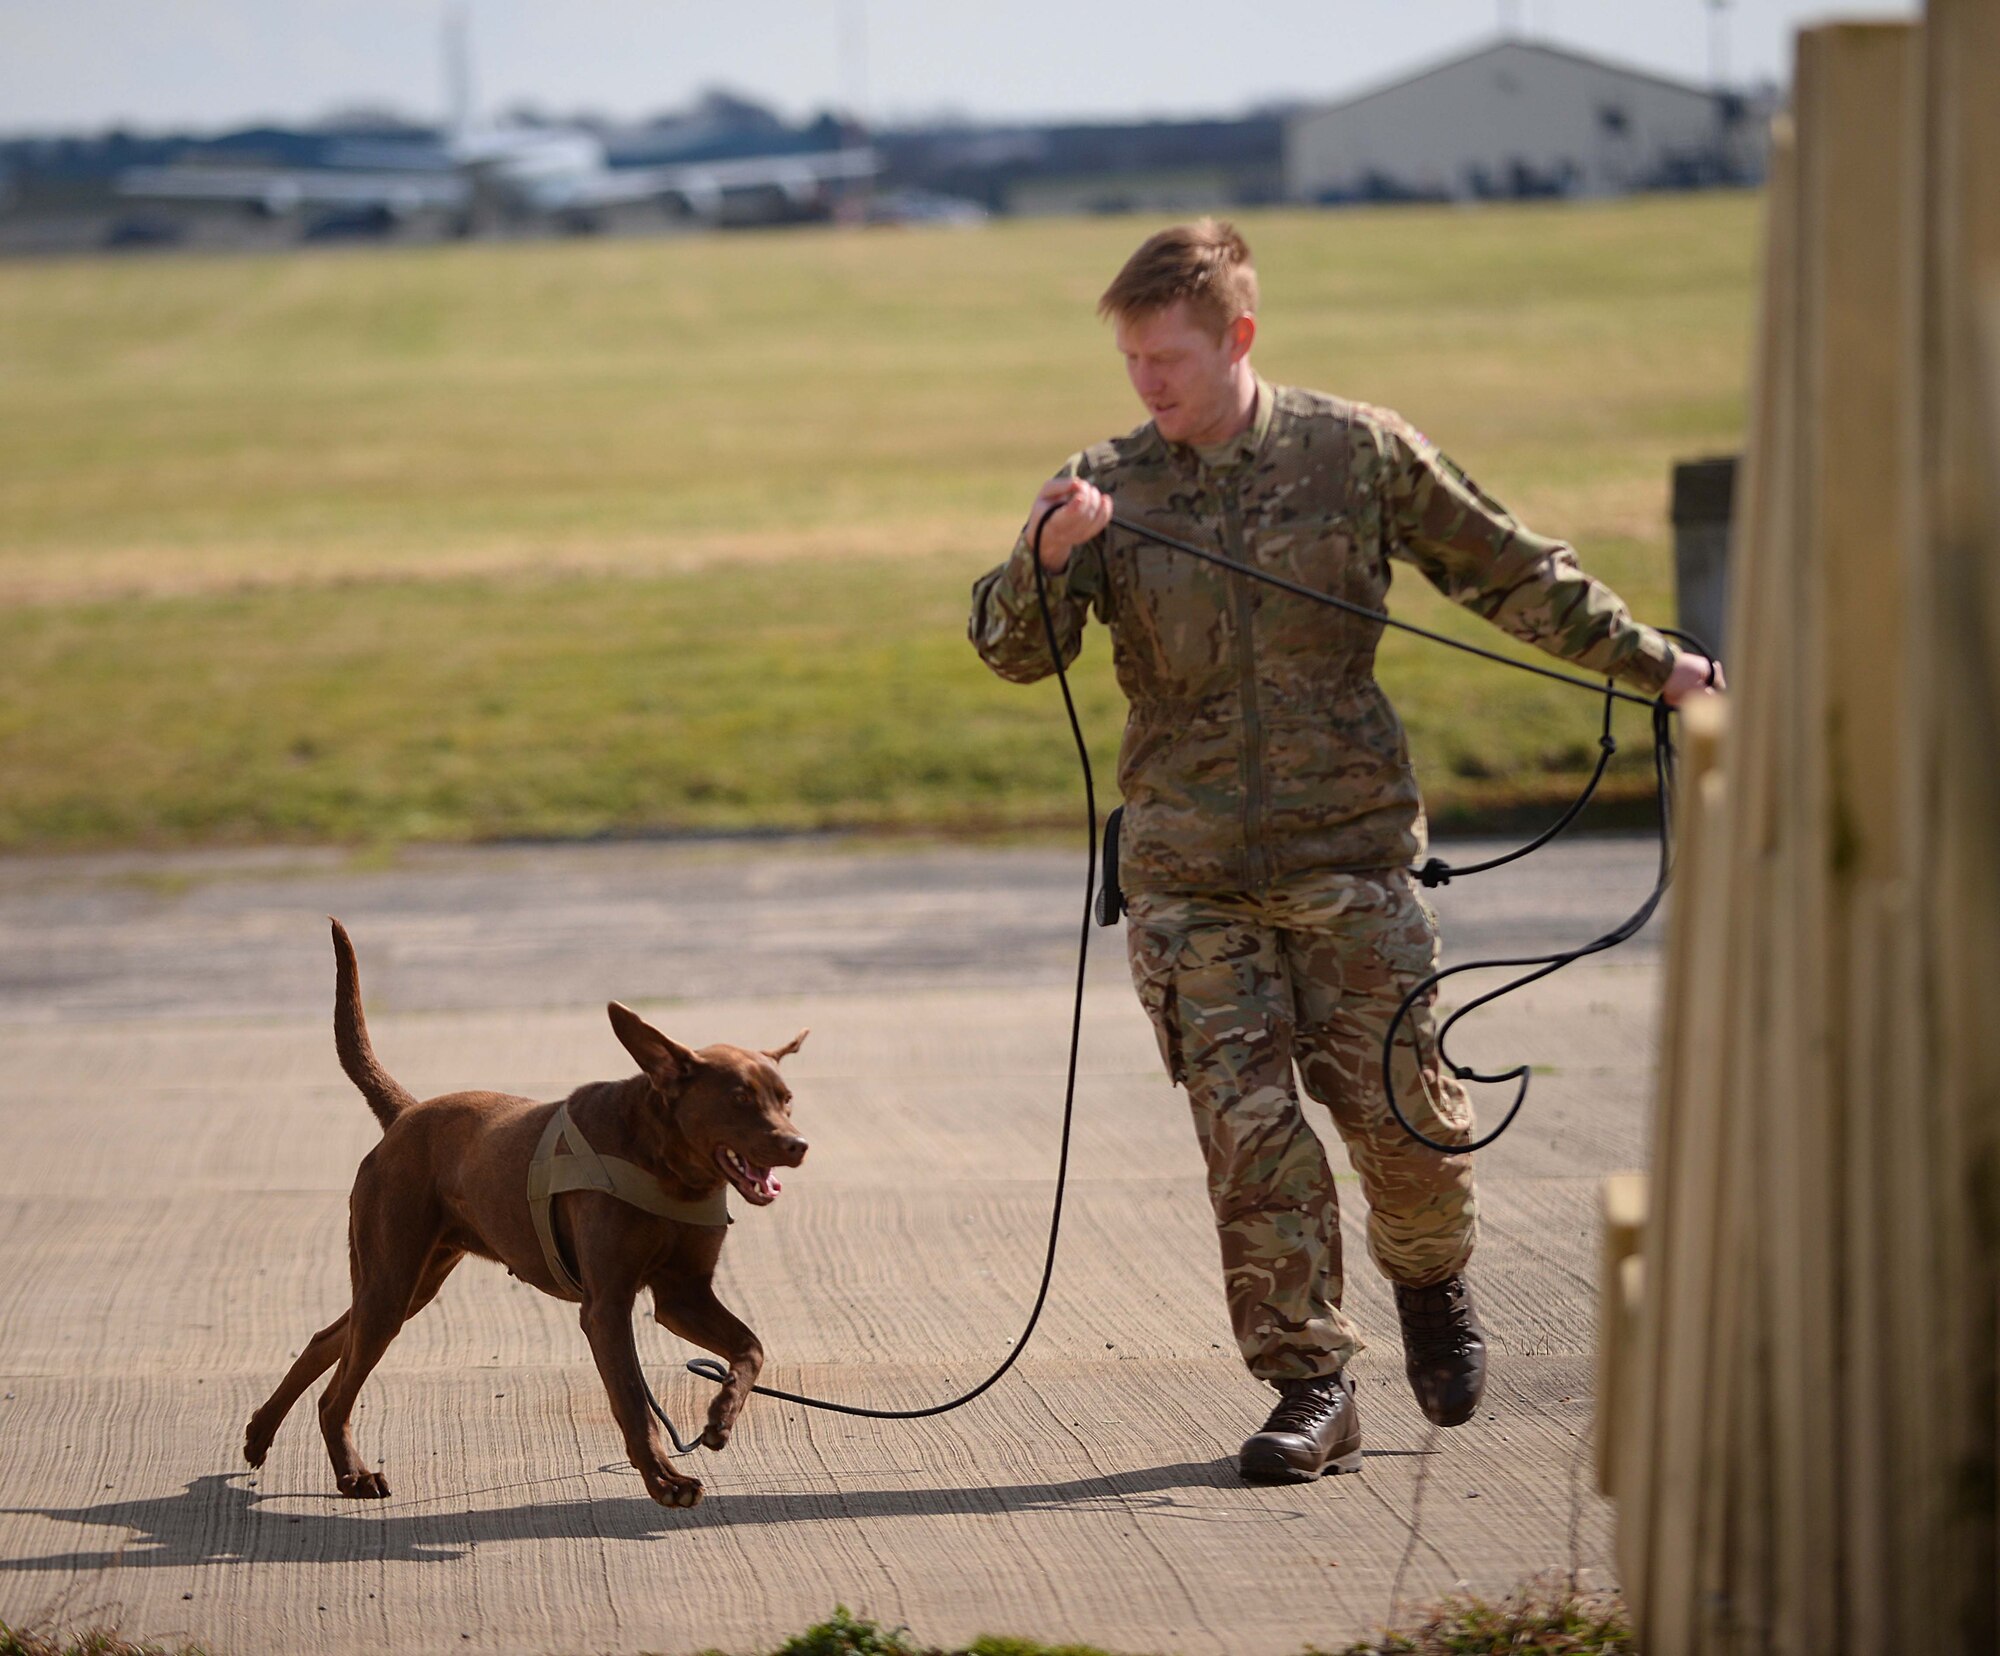 British Army Lance Cpl Brett Brian William France, 1st Military Working Dog Regiment MWD handler, conducts tracker training with a British Army military working dog at RAF Mildenhall, England, March 26, 2018.  The 100th Security Forces Squadron Military Working Dog section trained with the British Army handlers in order to exchange training methods. (U.S. Air Force photo by Senior Airman Luke Milano)